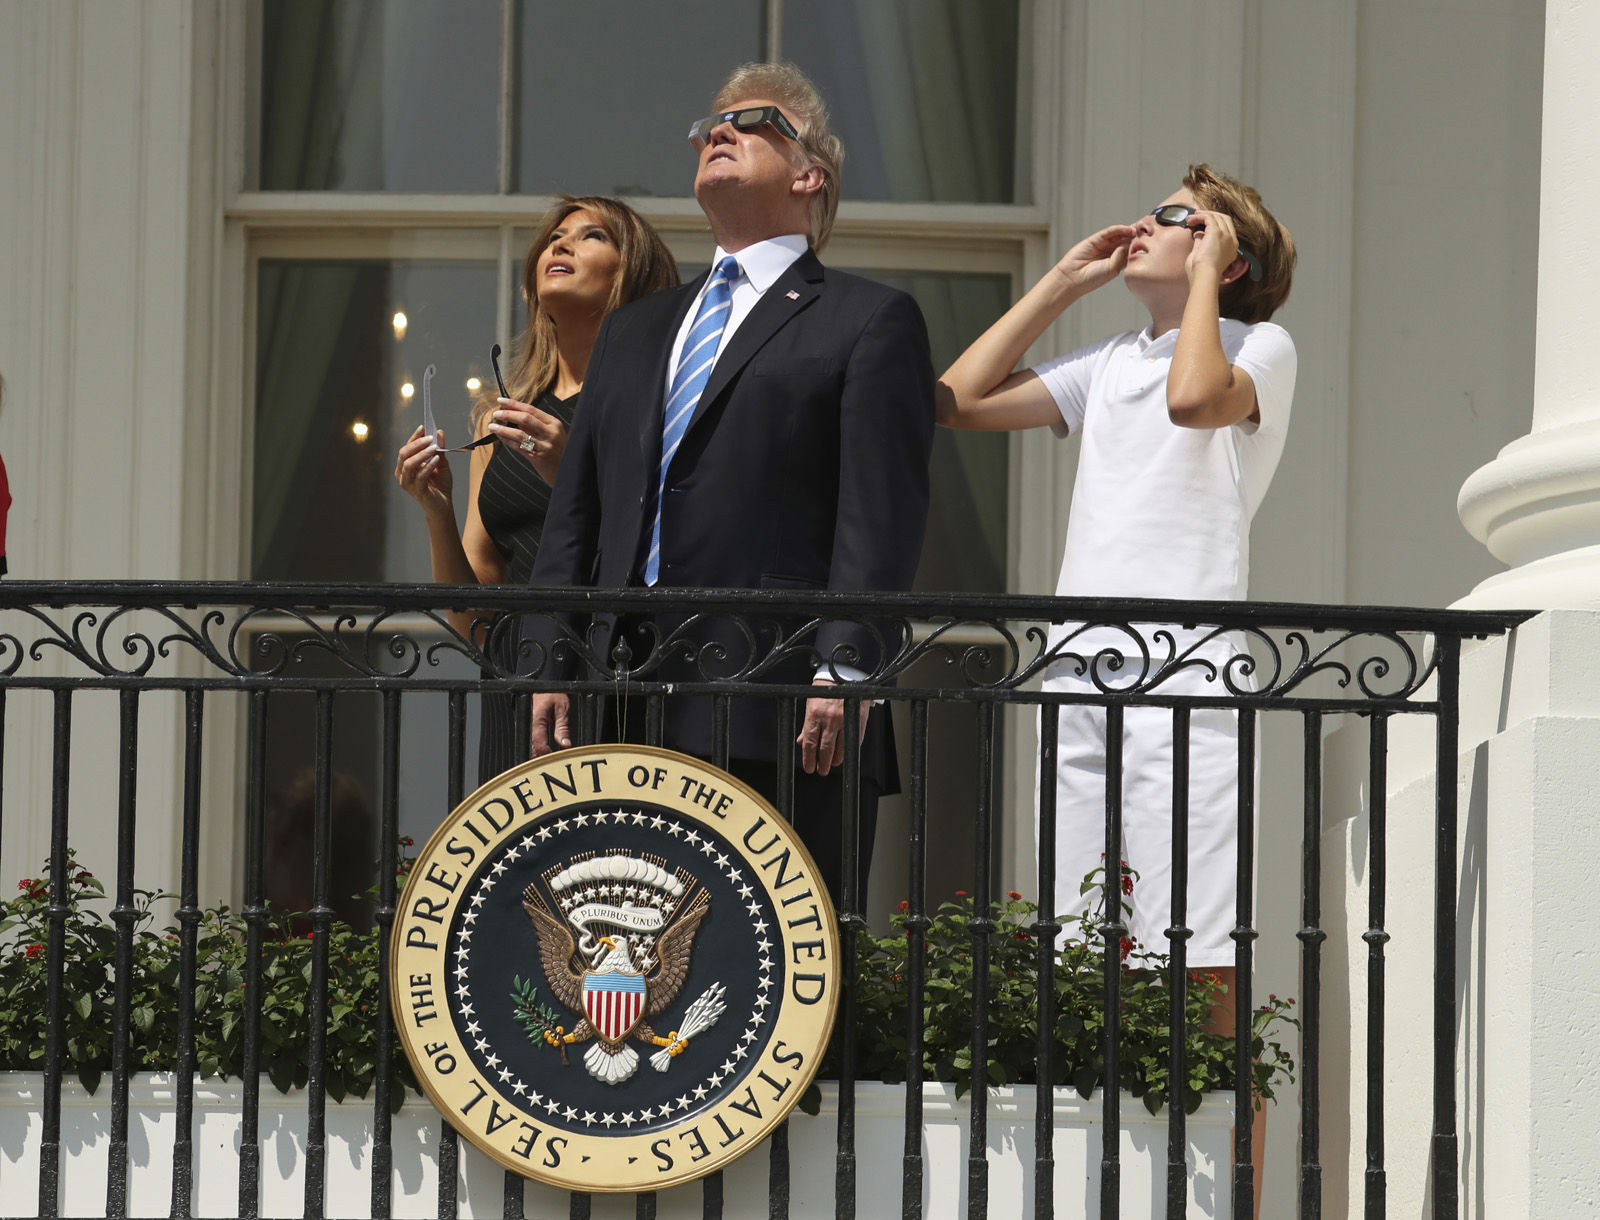 President Donald Trump, first lady Melania Trump and their son Barron watch the solar eclipse, Monday, Aug. 21, 2017, at the White House in Washington.  (AP Andrew Harnik)